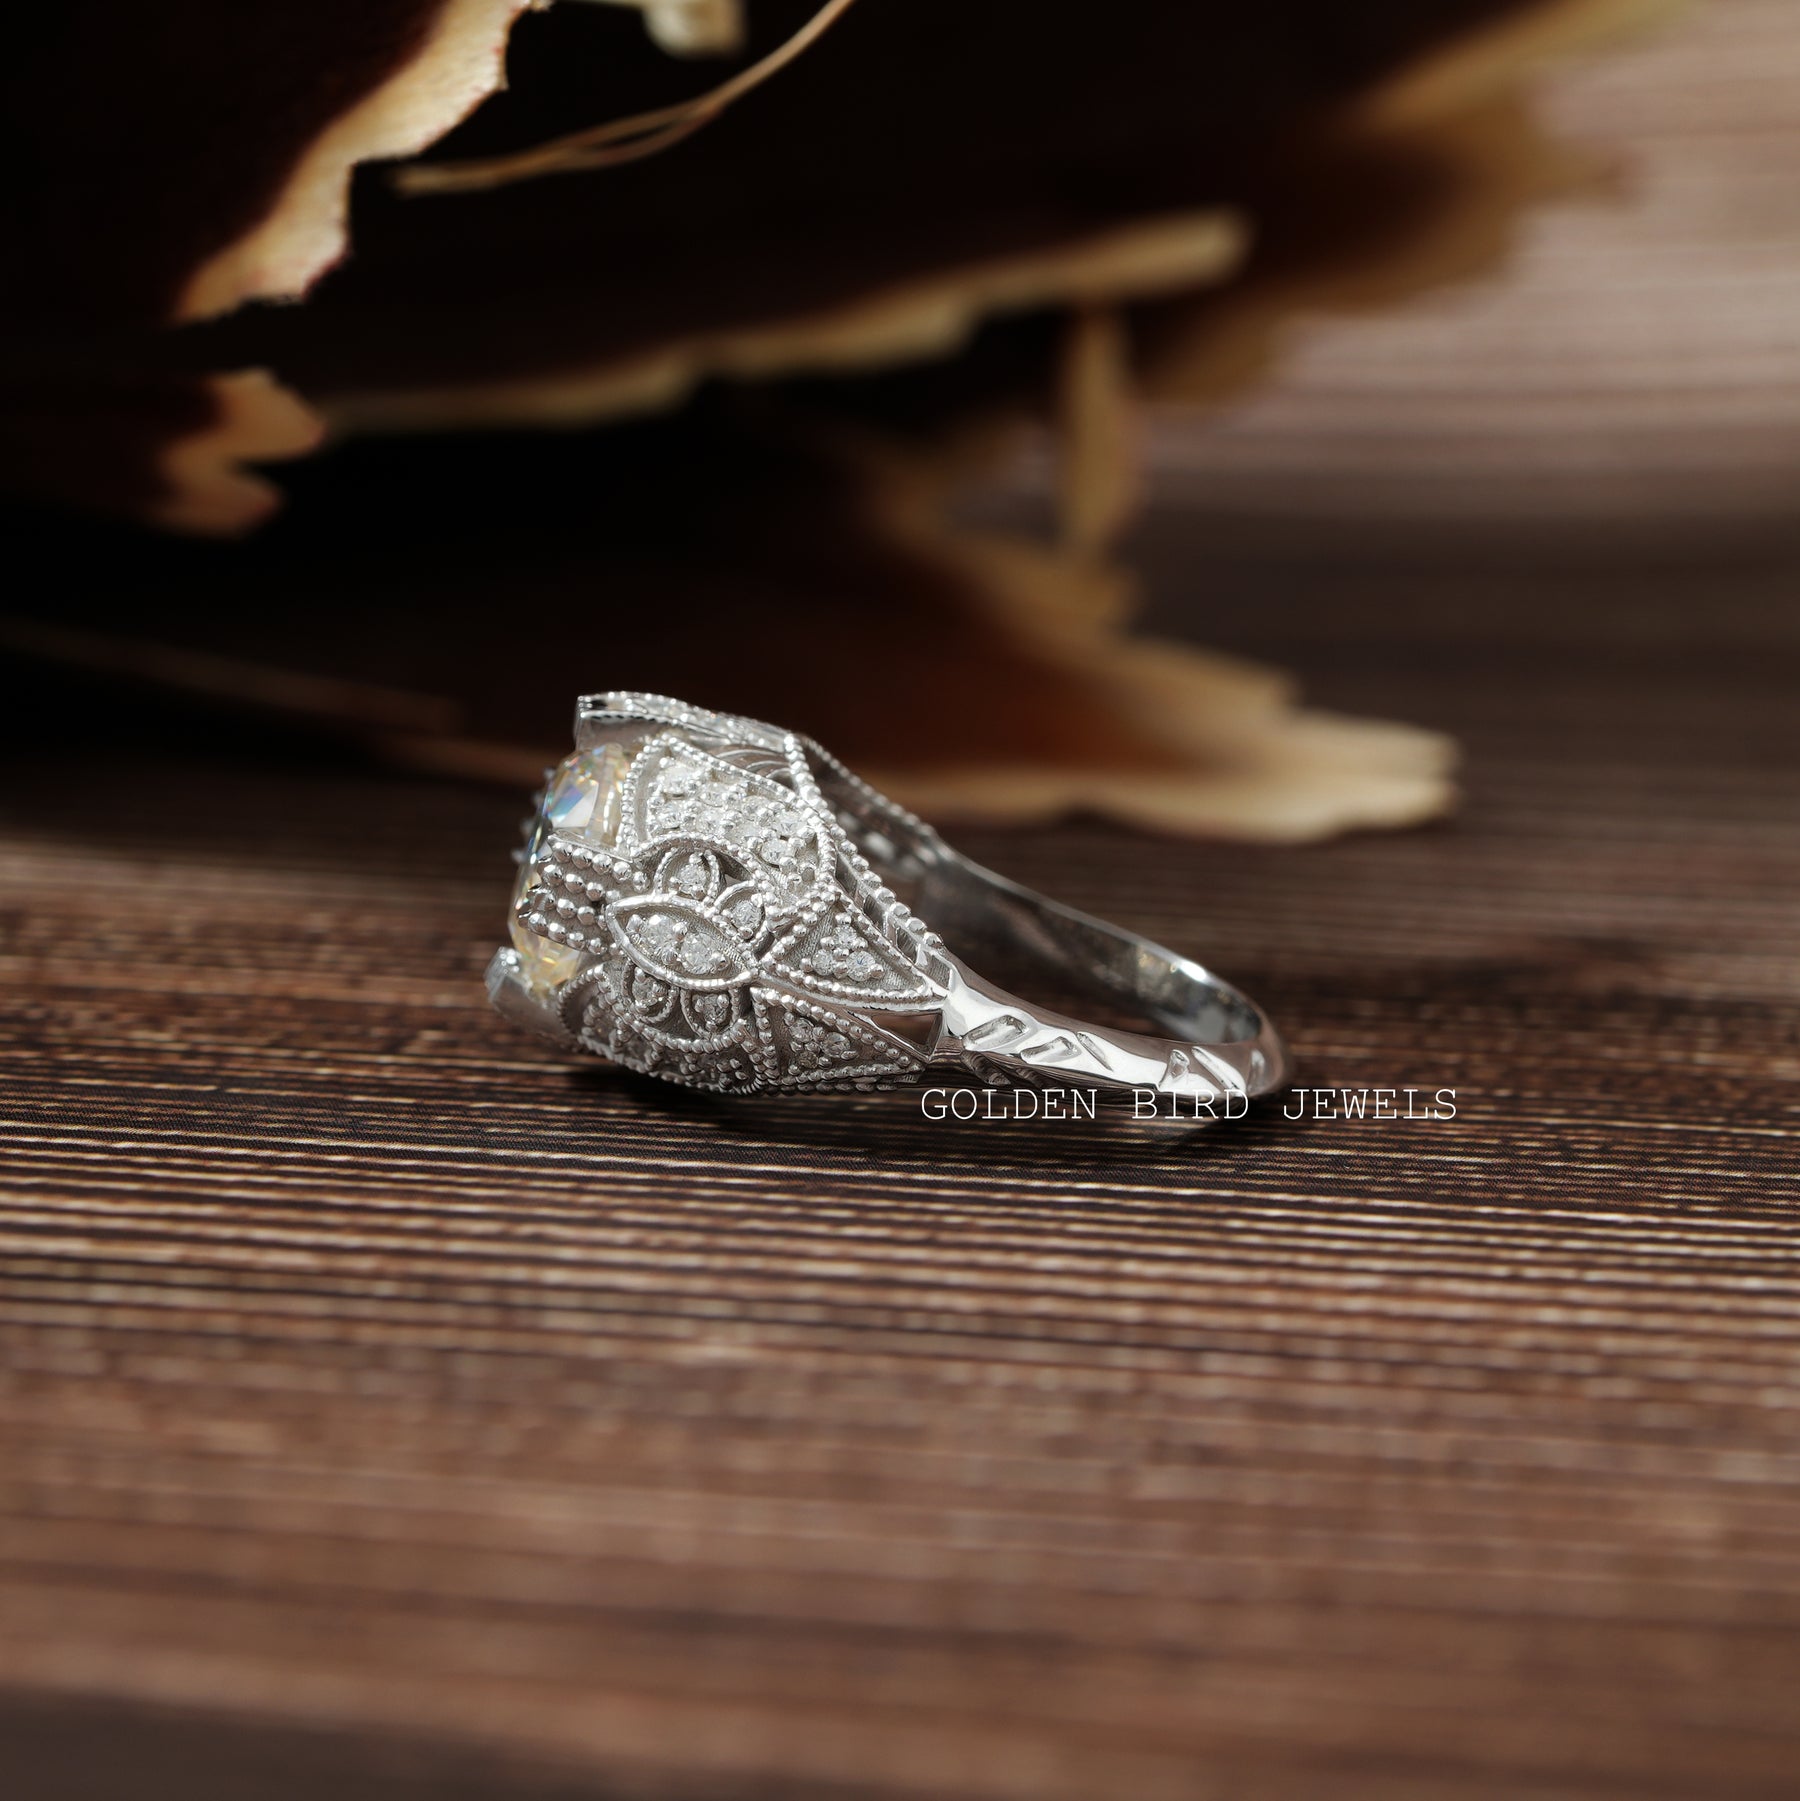 [Moissanite round cut art deco ring made of white gold and art deco design]-[Golden Bird Jewels]